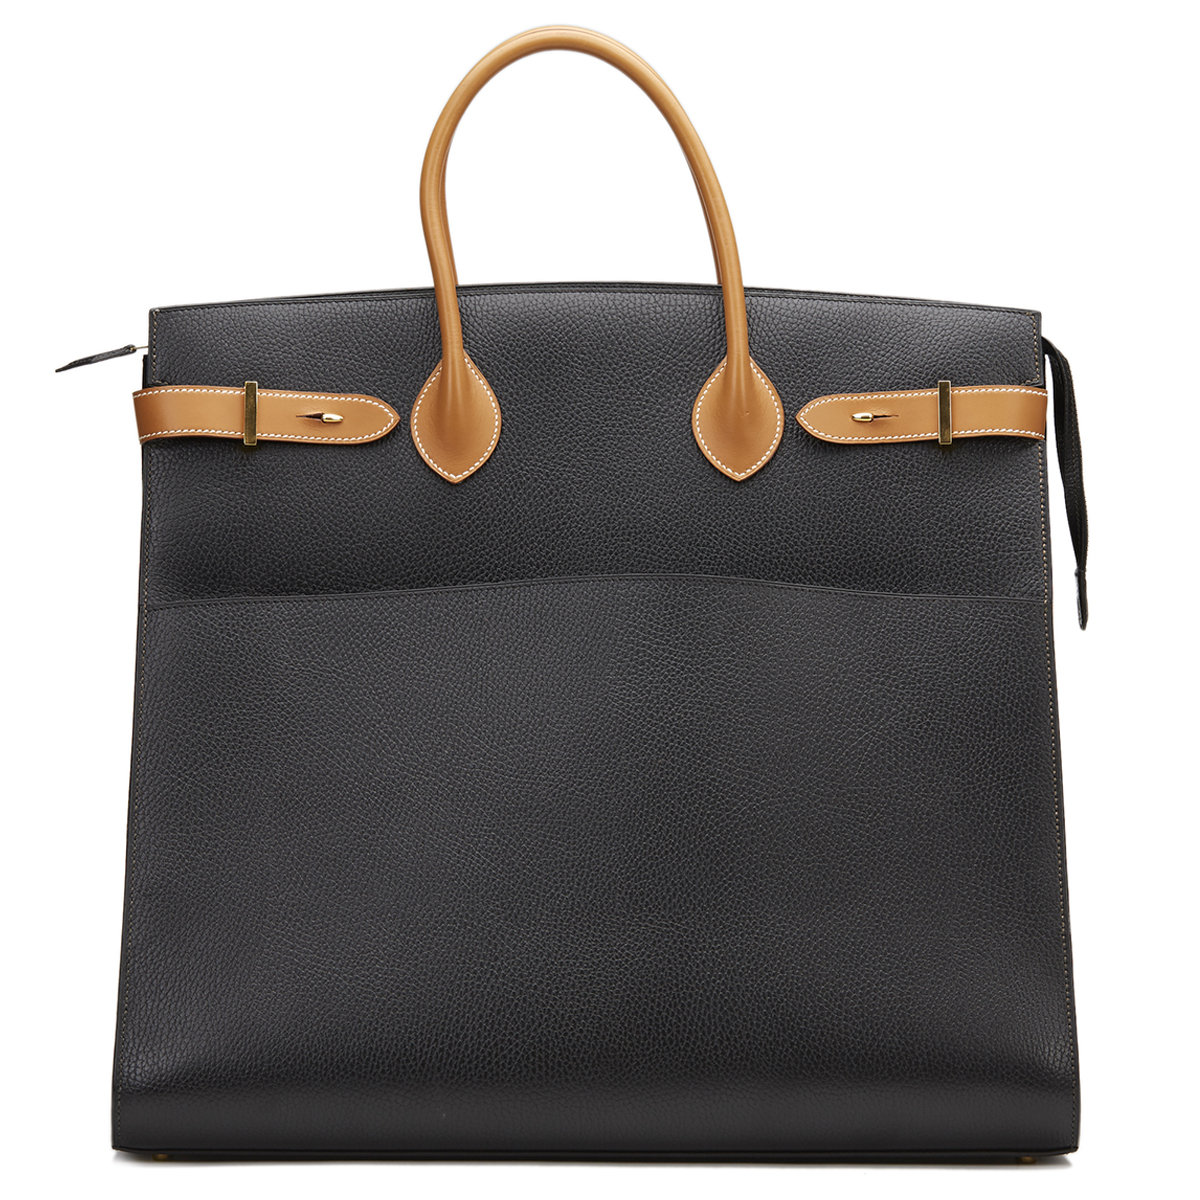 HERMES Airport Bag , - Black Ardennes Leather & Brown Natural Leather Vintage Airport Bag   TYPE